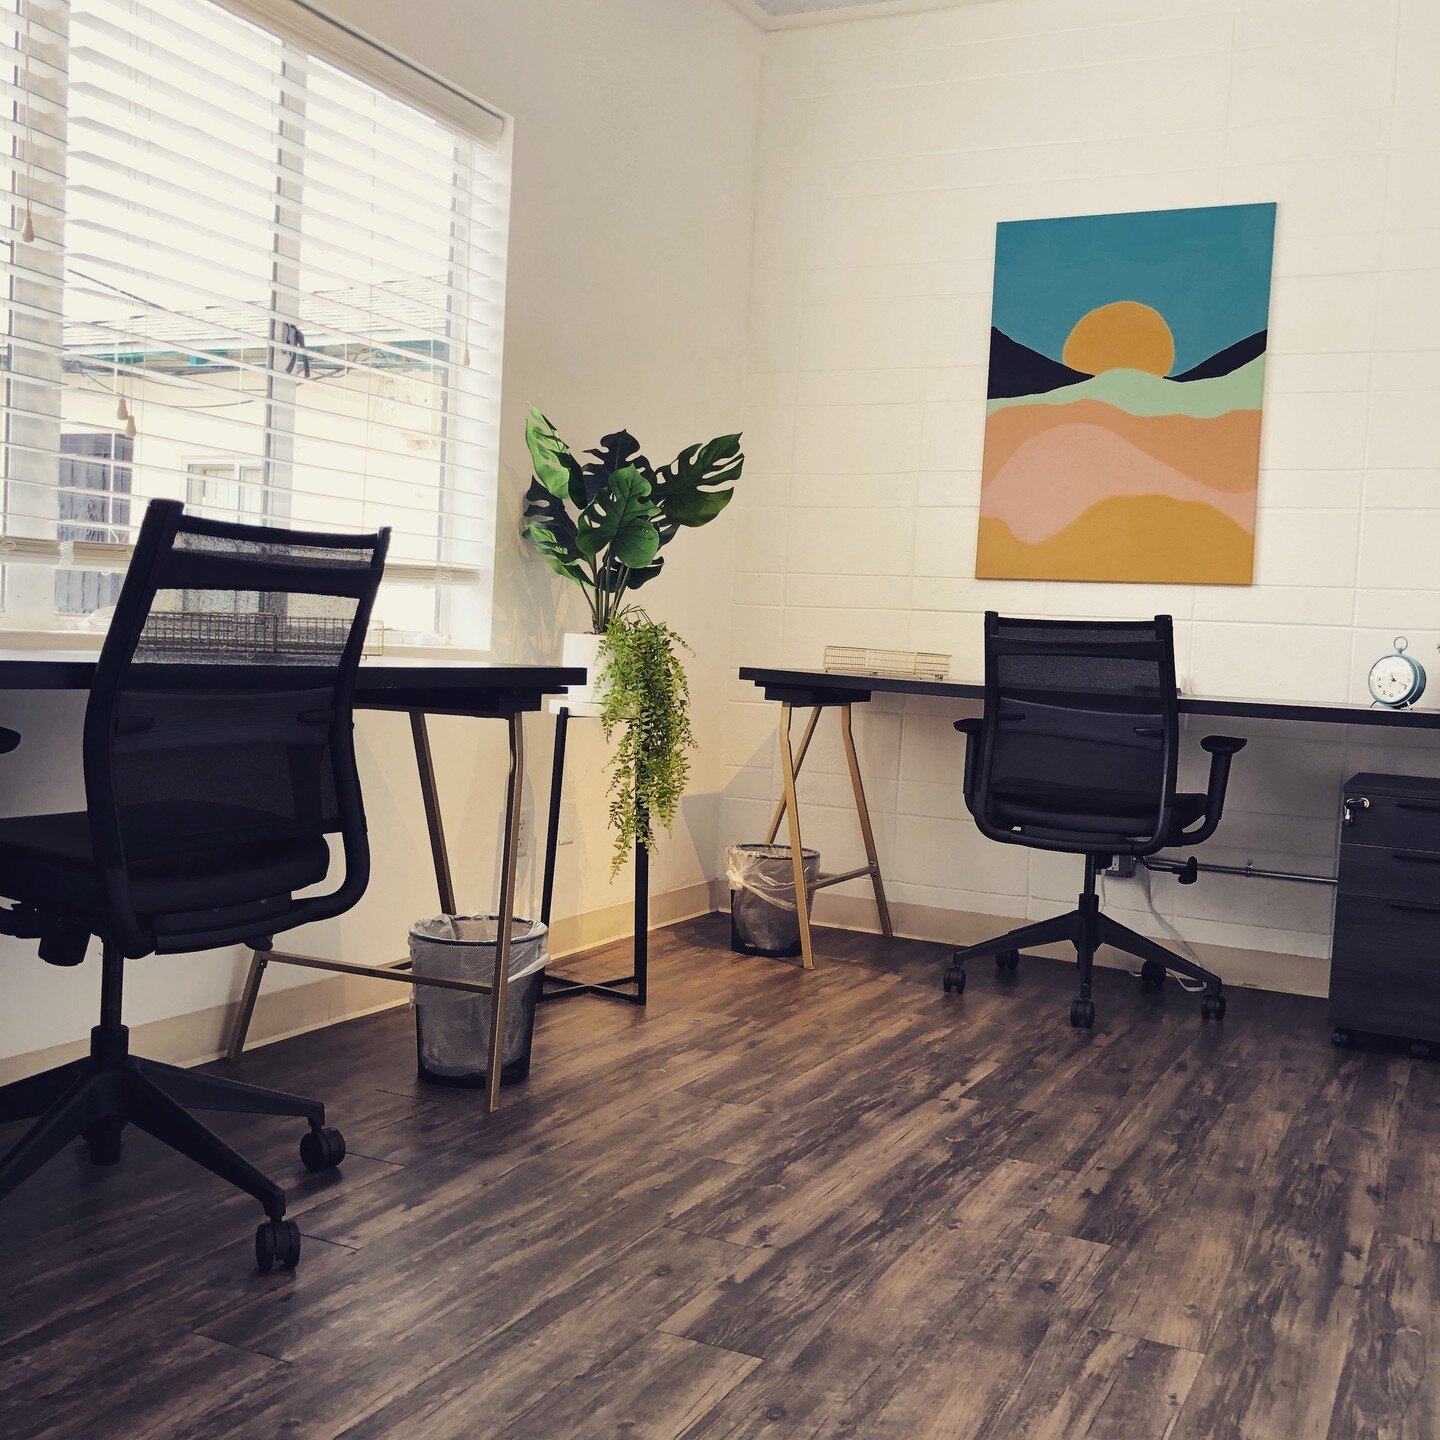 Upgrade your work environment with a private office at Hardihood Cowork! Our private offices are fully furnished and equipped with all the amenities you need to thrive. Benefit from high-speed internet, 24/7 access, conference room usage, printing se